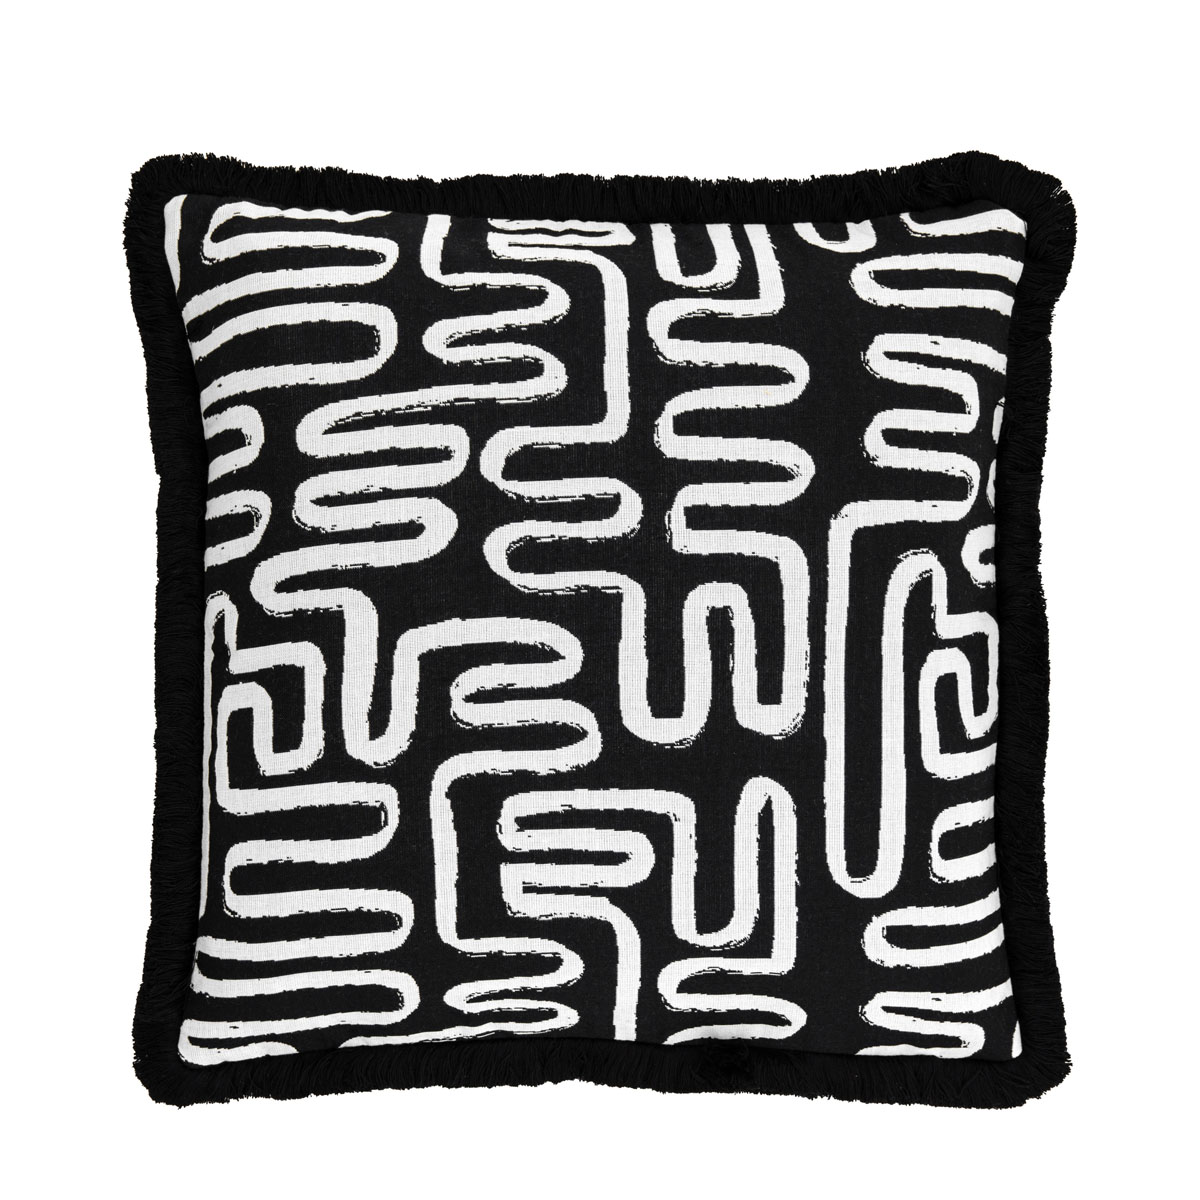 Annecy Black Cushion Cover 500x500mm